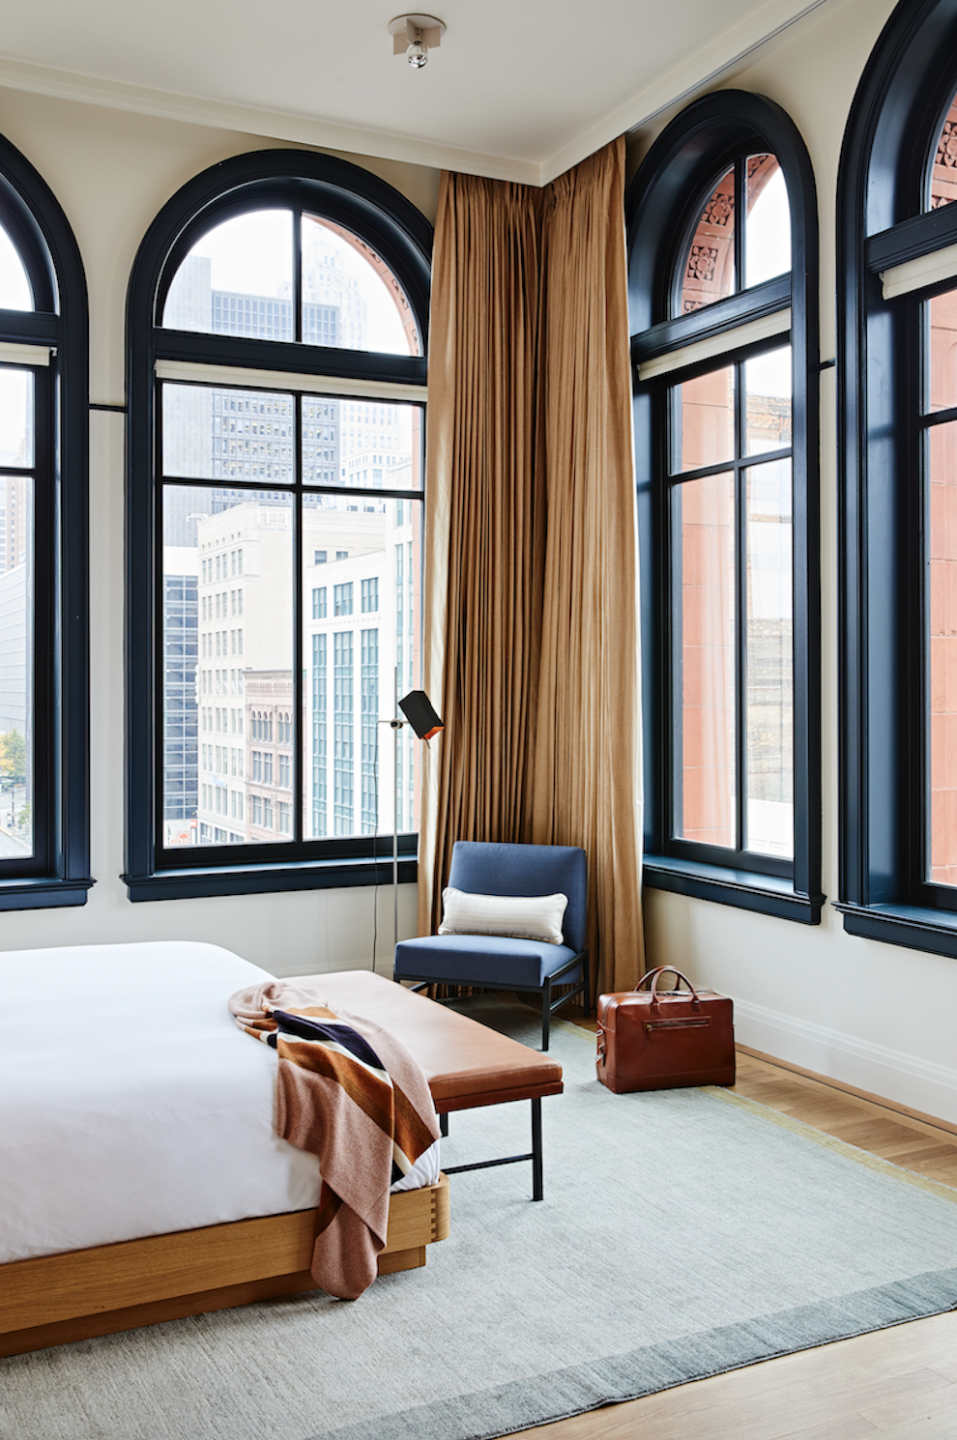 Shinola Hotel in Detroit is the Hotel We’d Live in If We Could